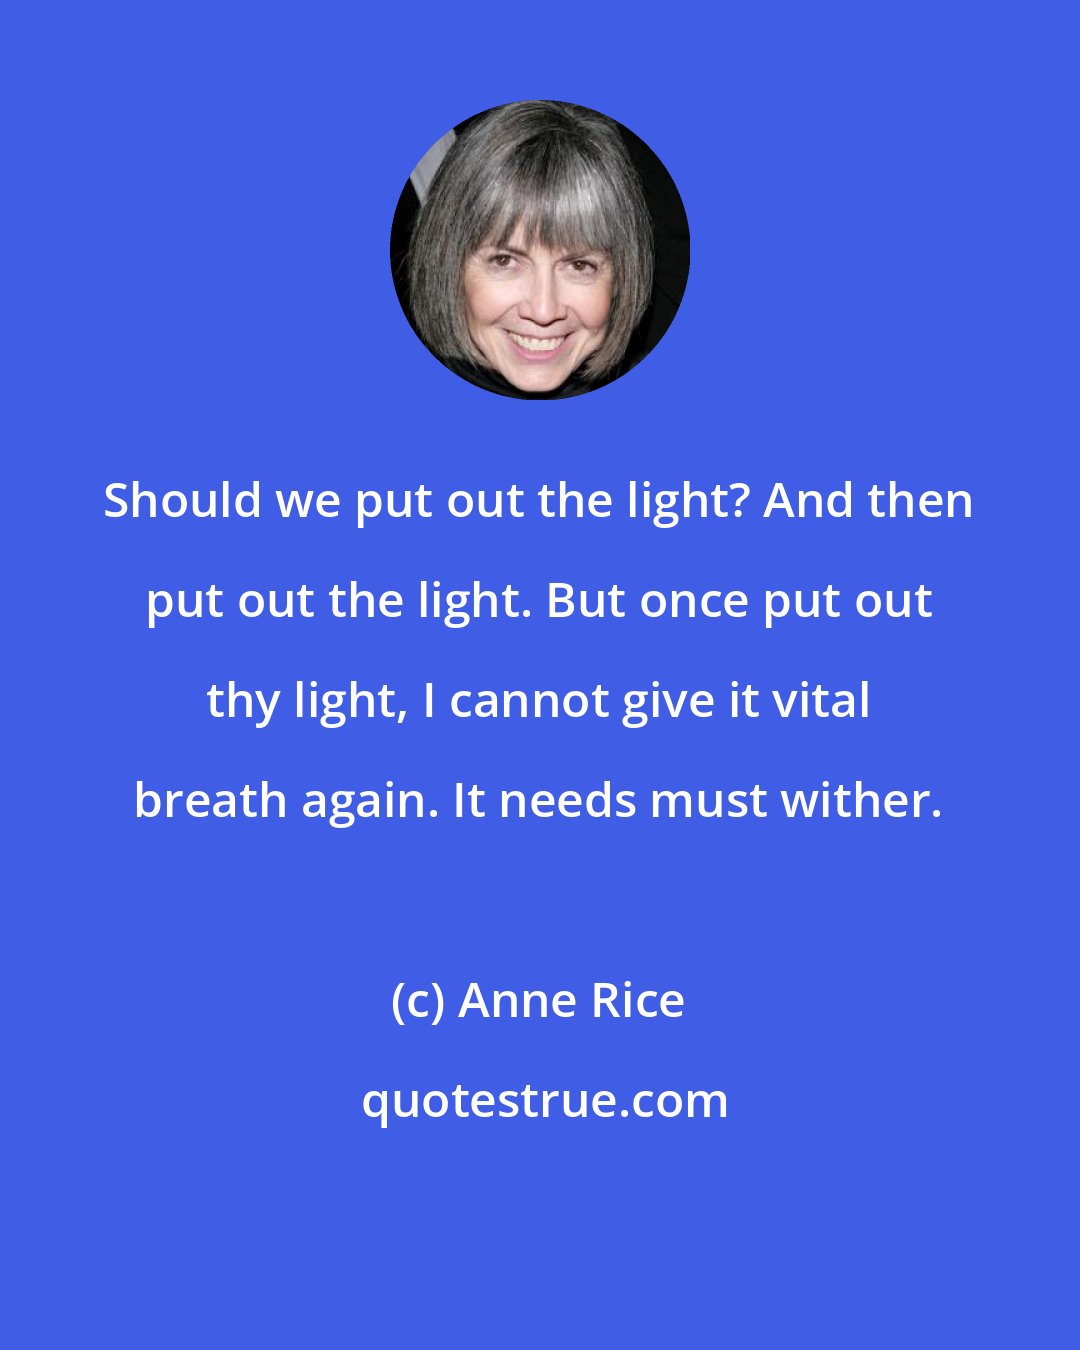 Anne Rice: Should we put out the light? And then put out the light. But once put out thy light, I cannot give it vital breath again. It needs must wither.